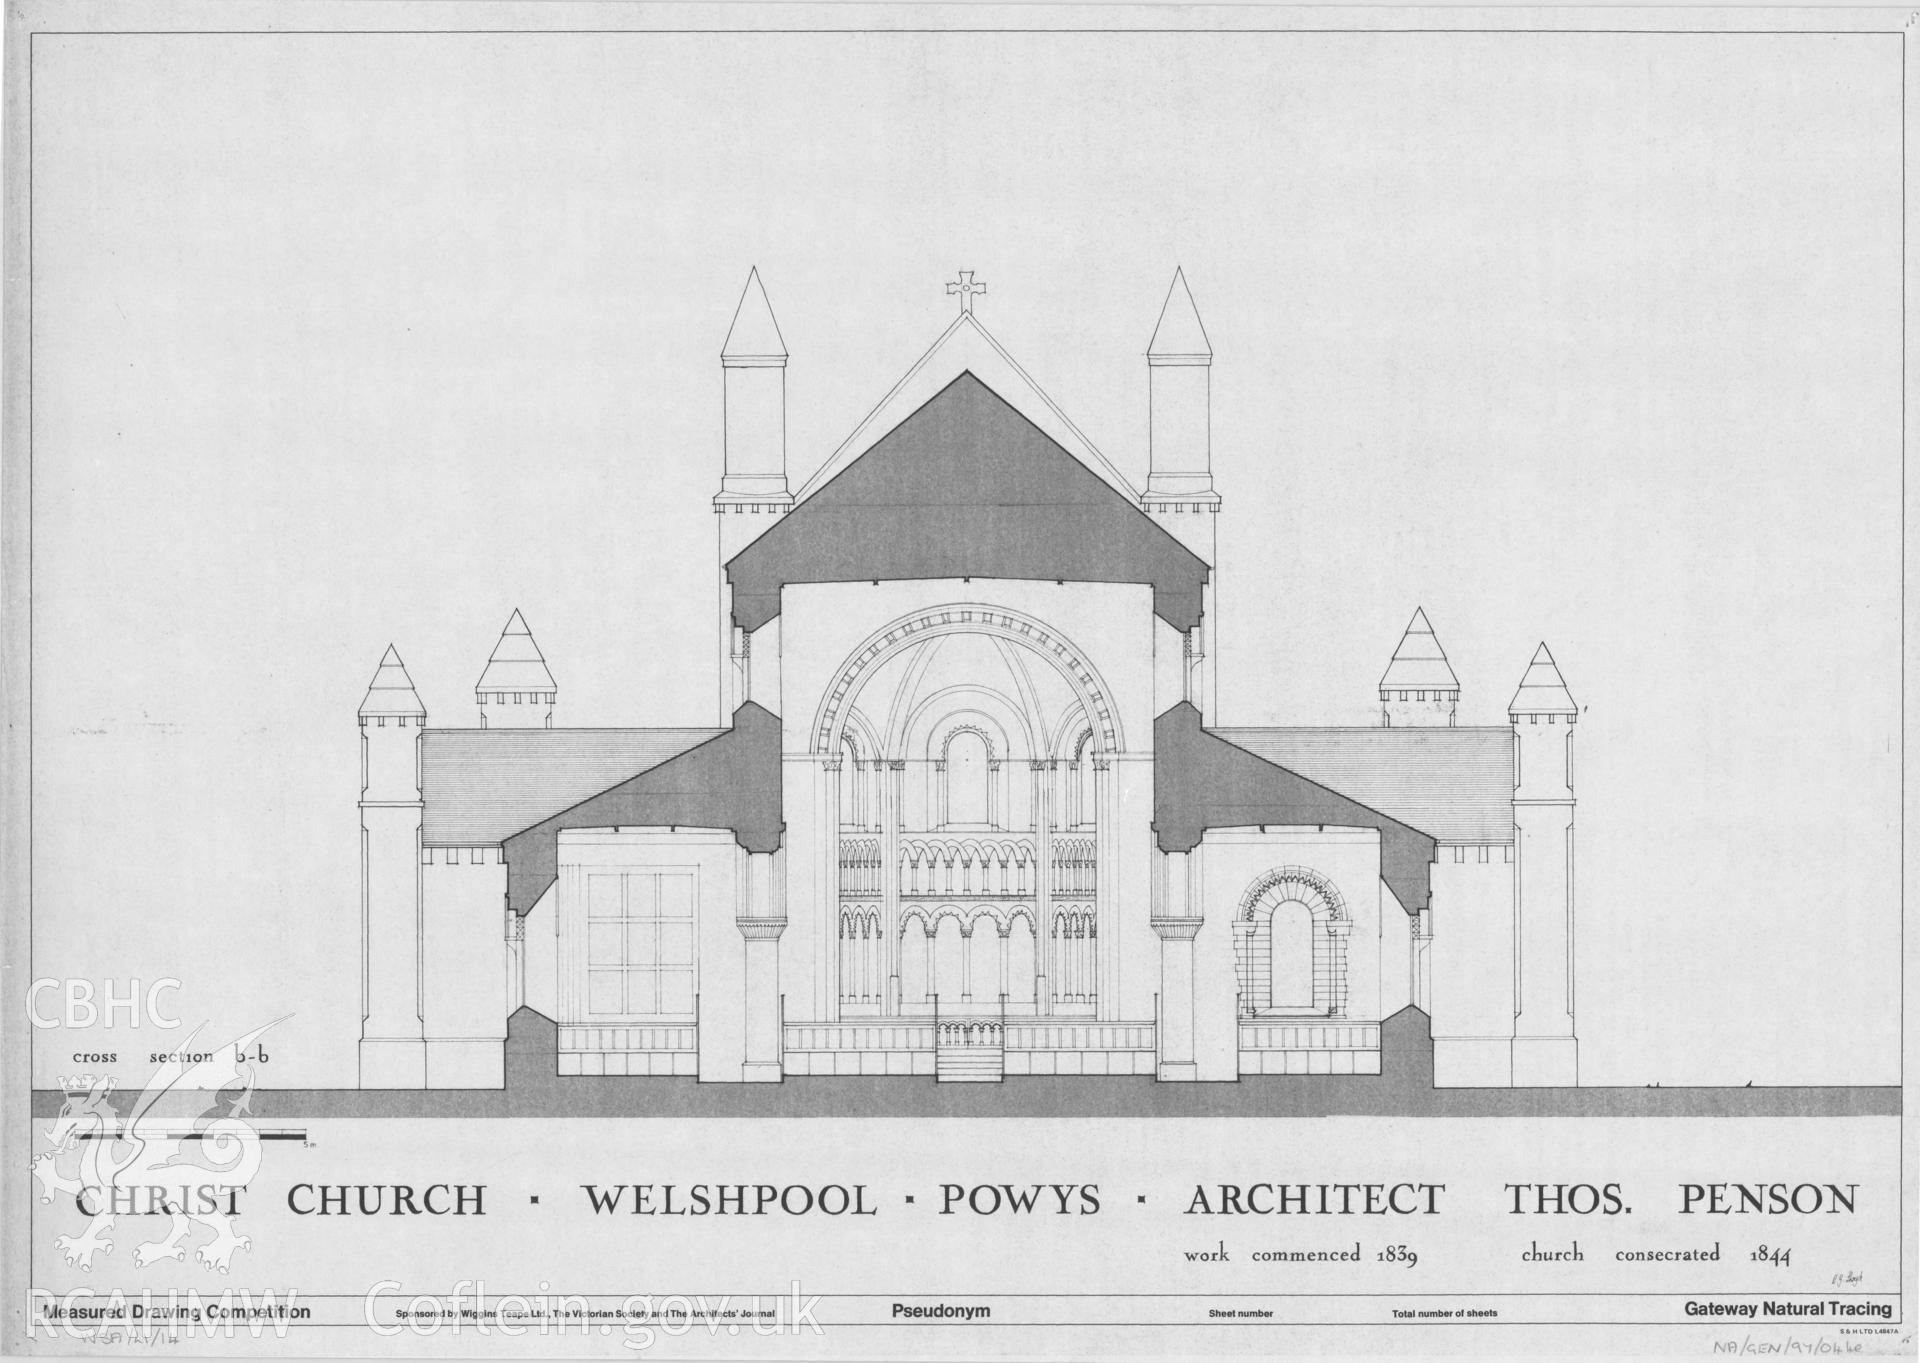 Measured drawing showing cross section view of Christ Church, Welshpool, produced by D. G. Lloyd, I. Rose and G. Usherwood, 1978